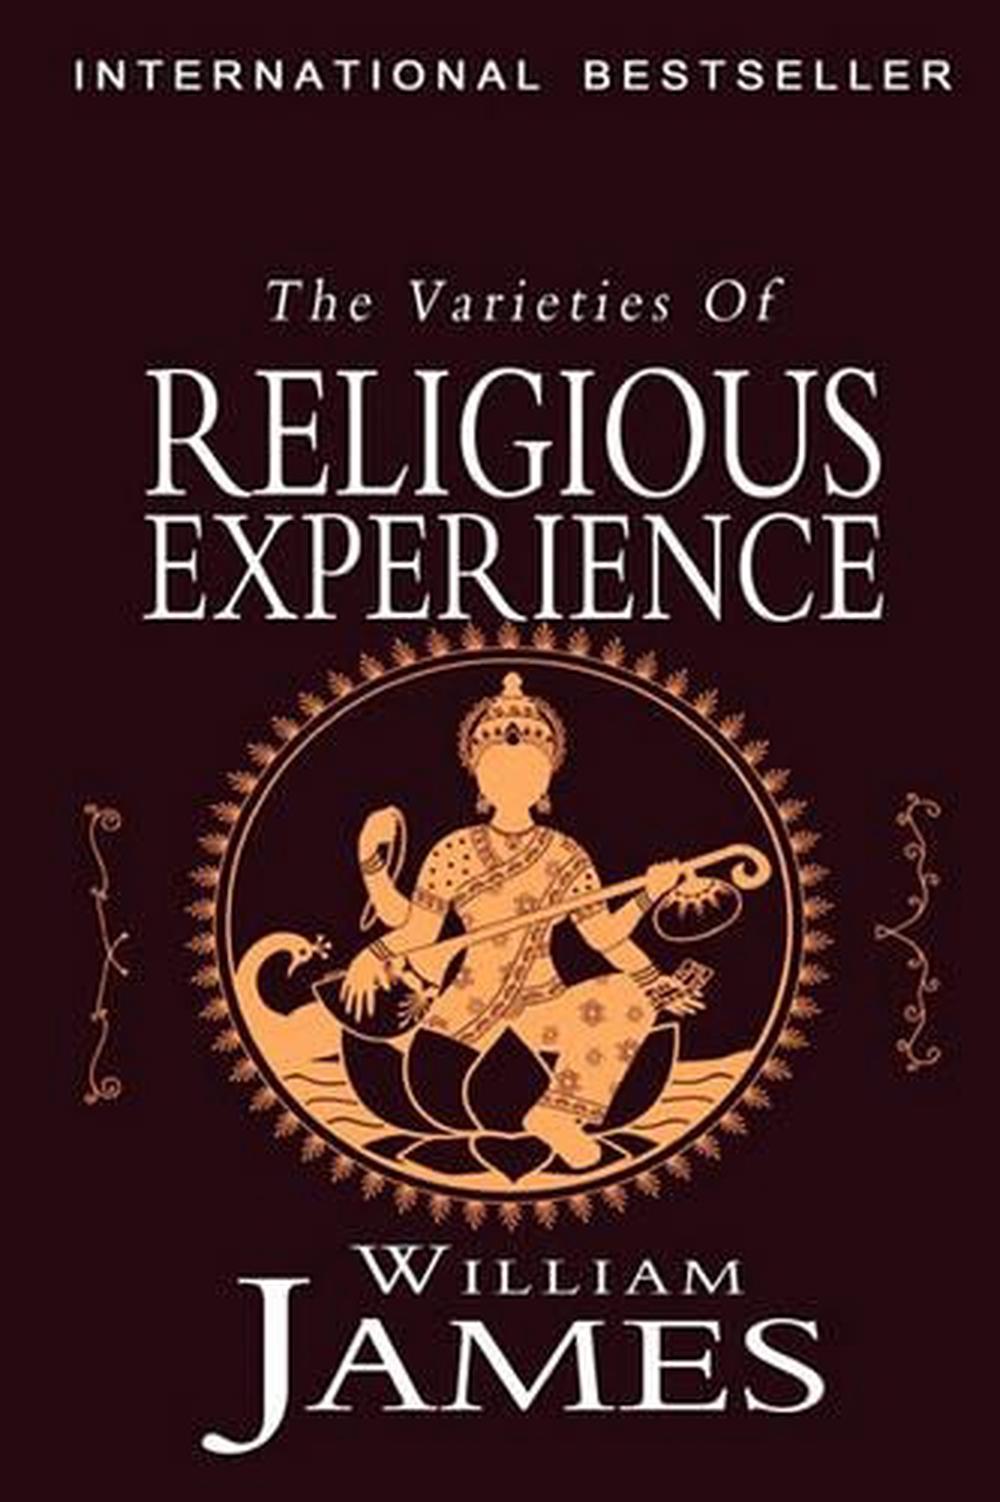 the varieties of religious experience a study in human nature